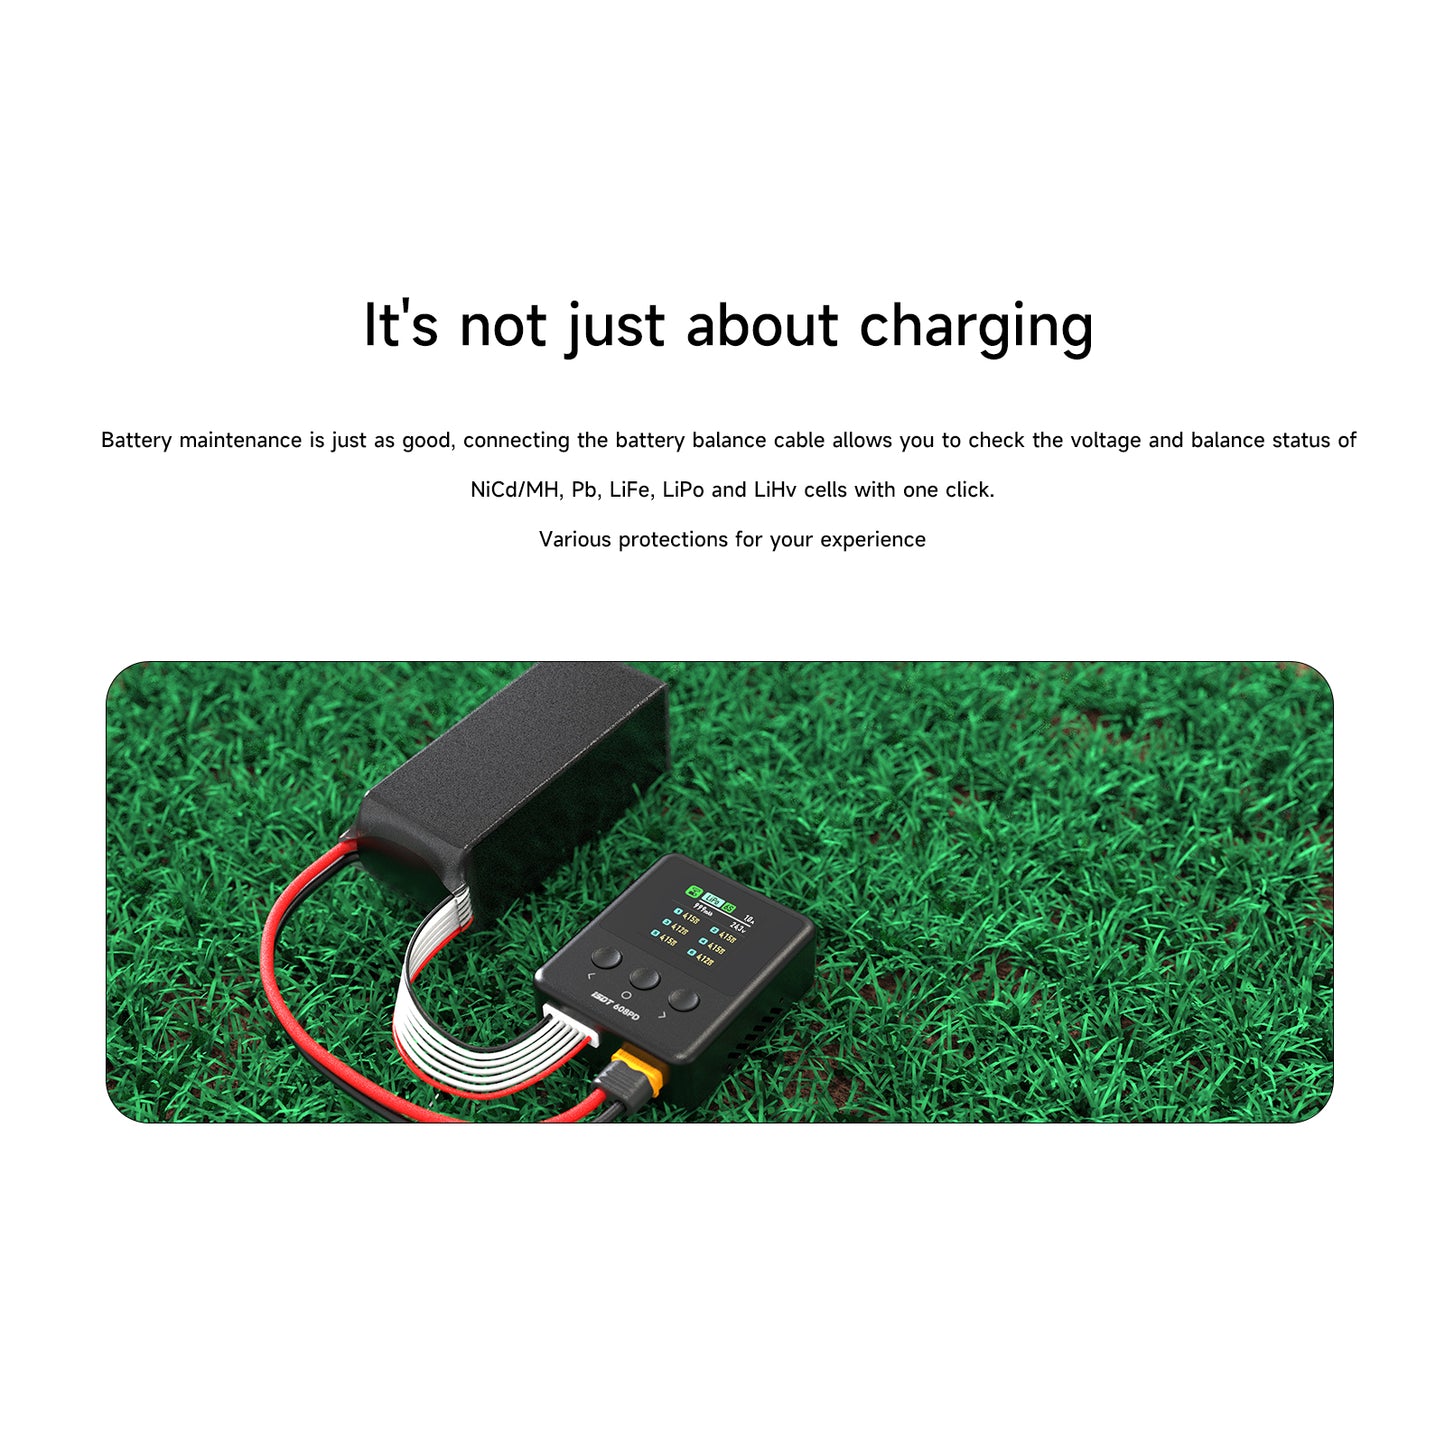 ISDT 608PD Lipo Charger,DC 240W/10A USB C 140W/5A Smart Digital Charger for RC Batteries,Universal Balance Discharge Charger for LiFe/Lilon/LiPo/LiHV (1-6S),NiMH(1-16S),Pb (1-12S) Batteries ISDT